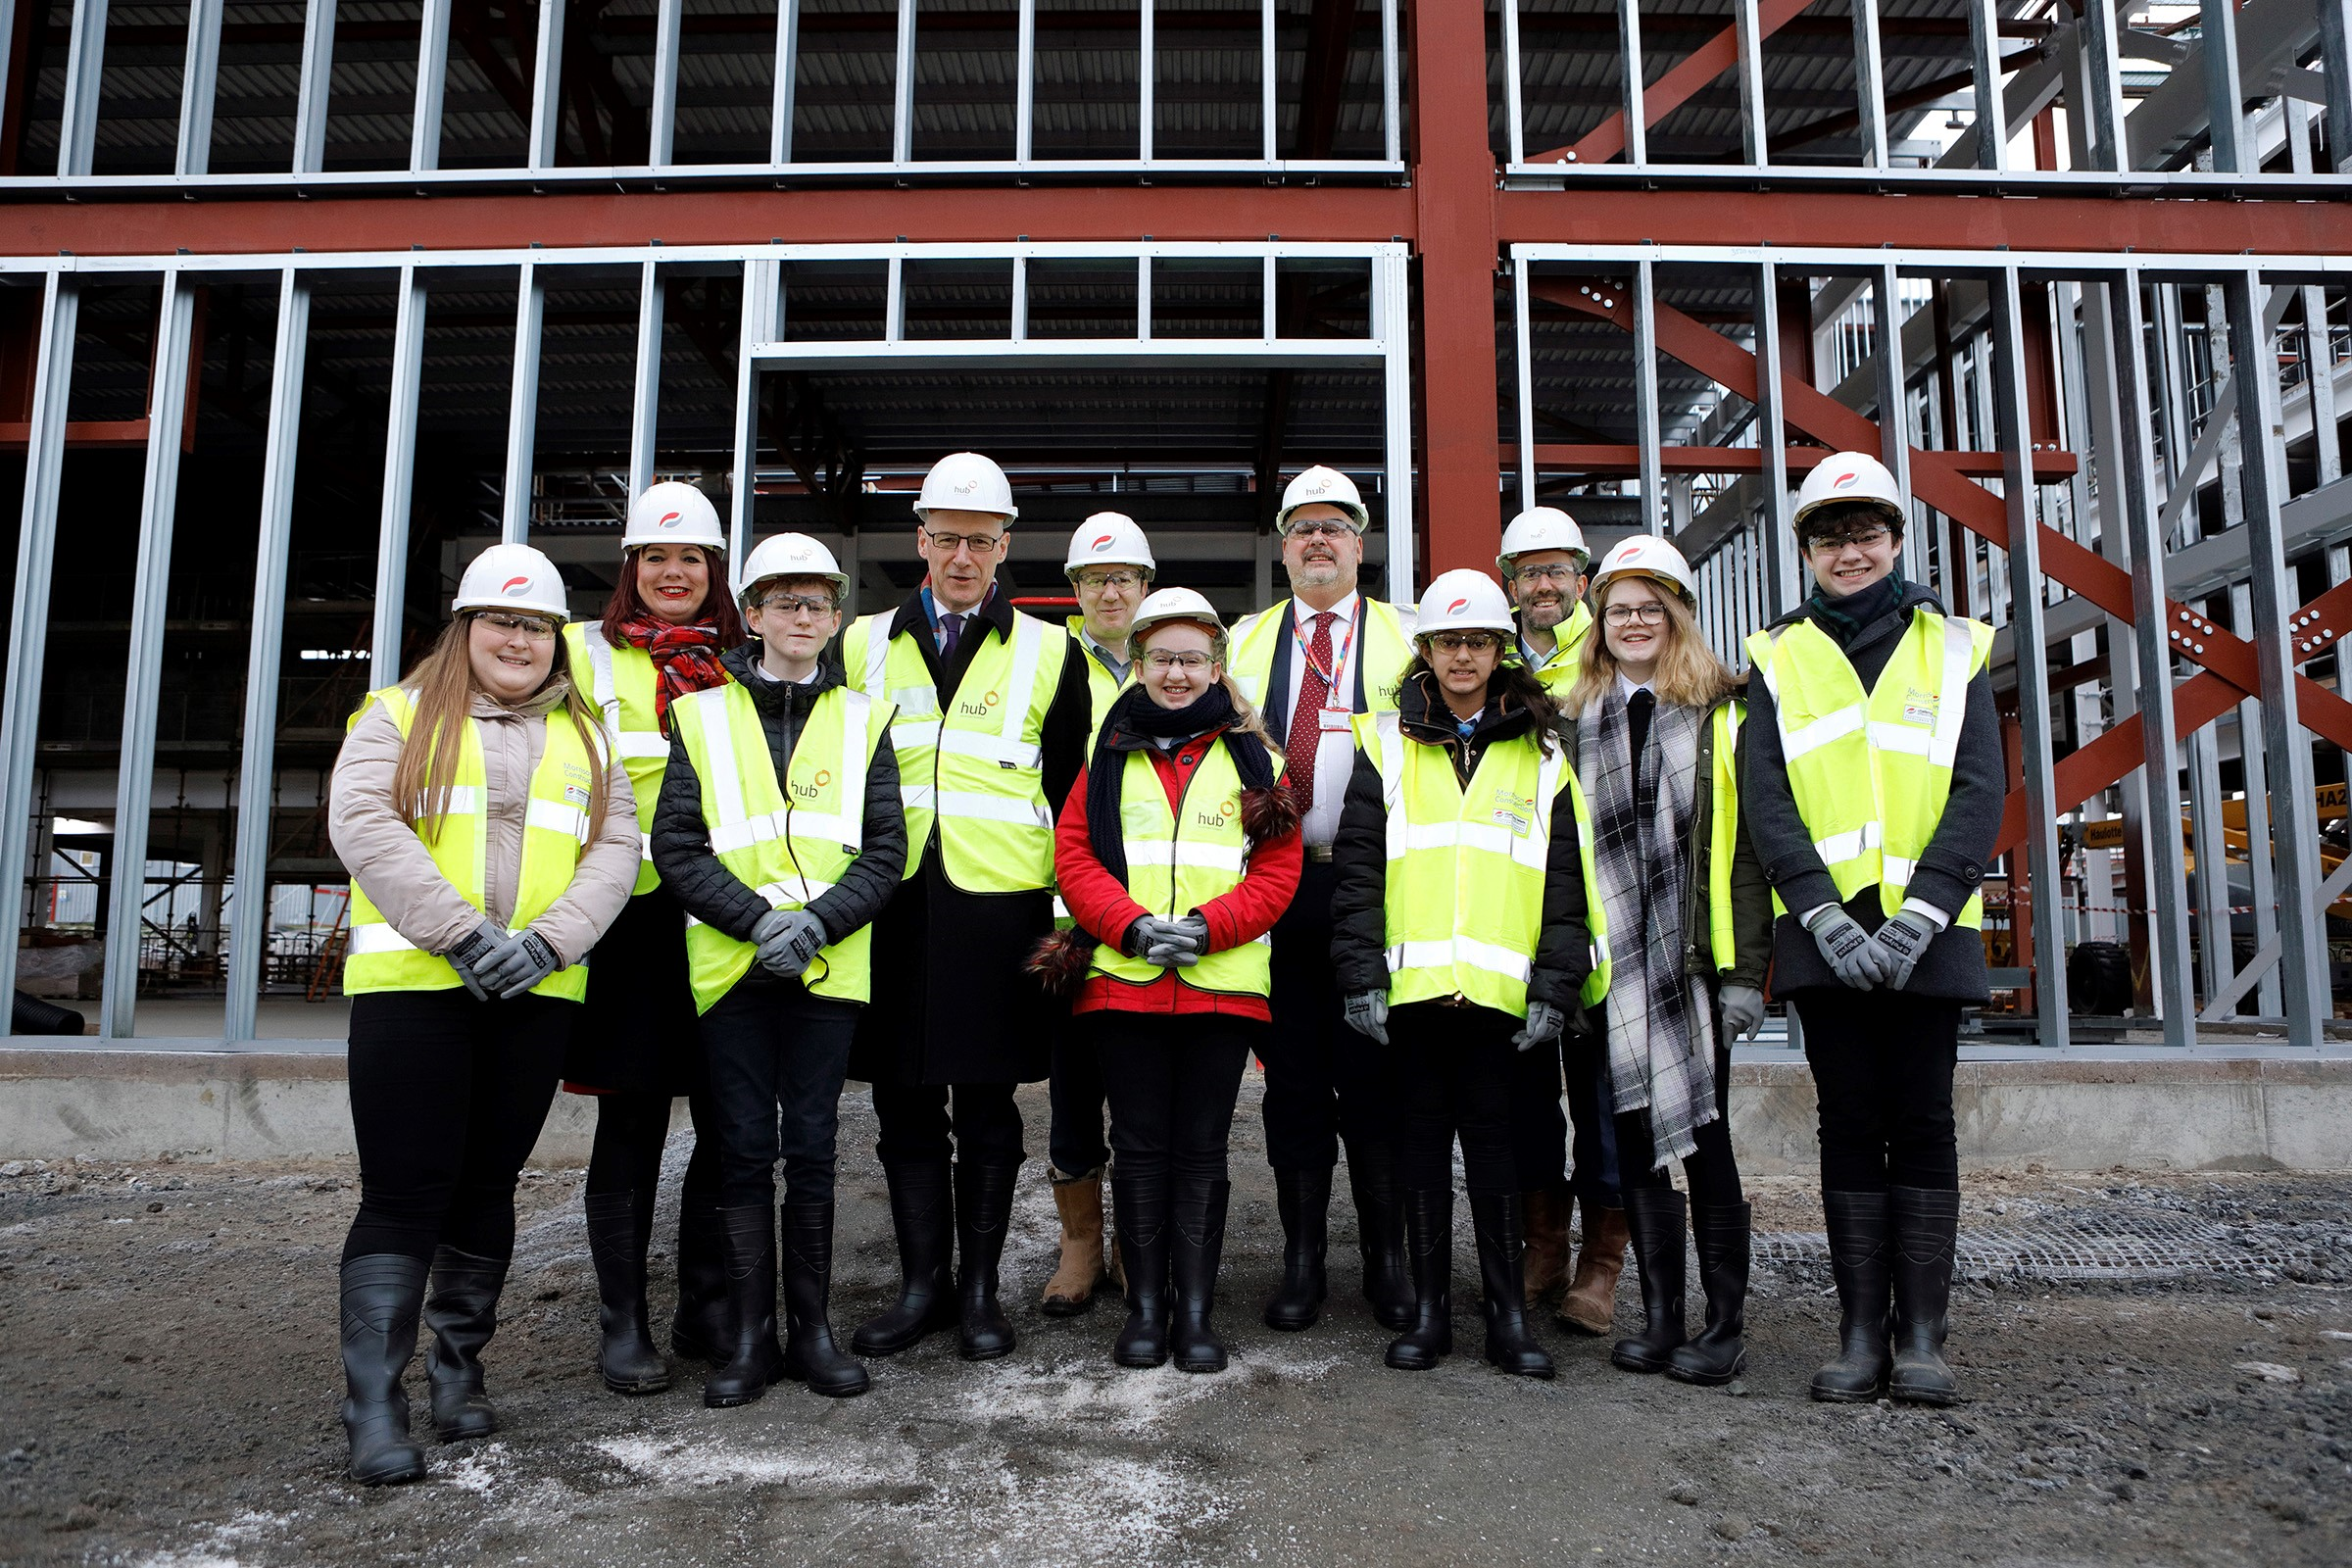 New Queensferry High School tops out